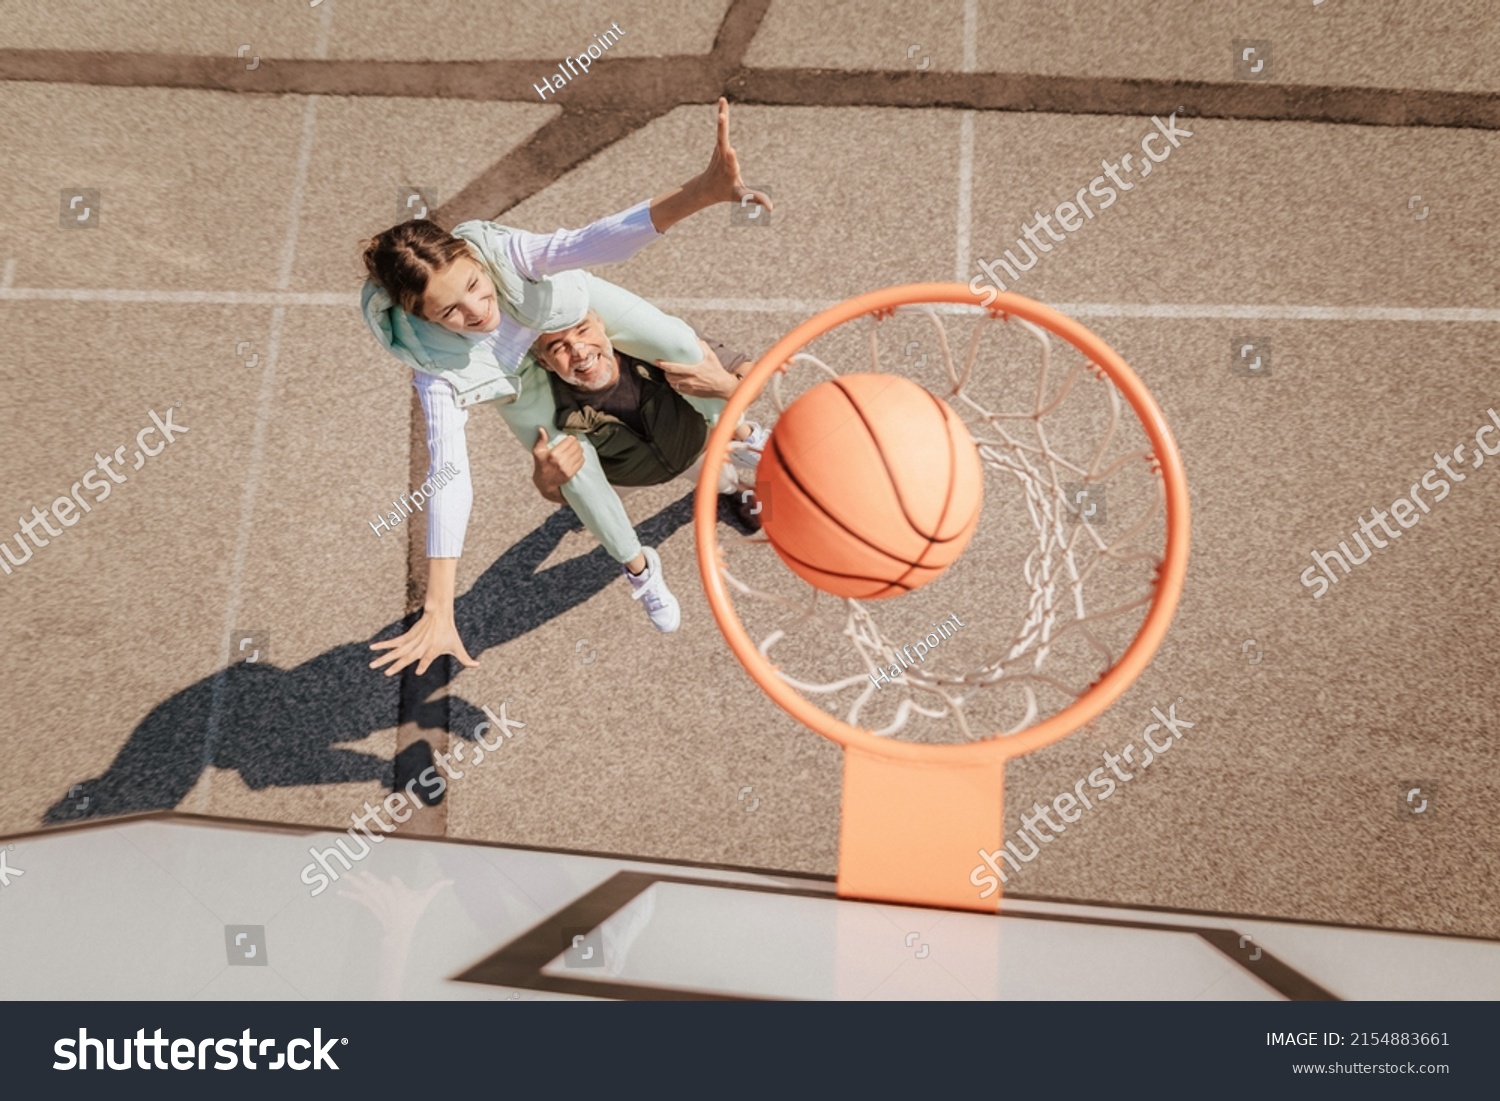 Father and teenage daughter playing basketball outside at court, high angle view above hoop net. #2154883661